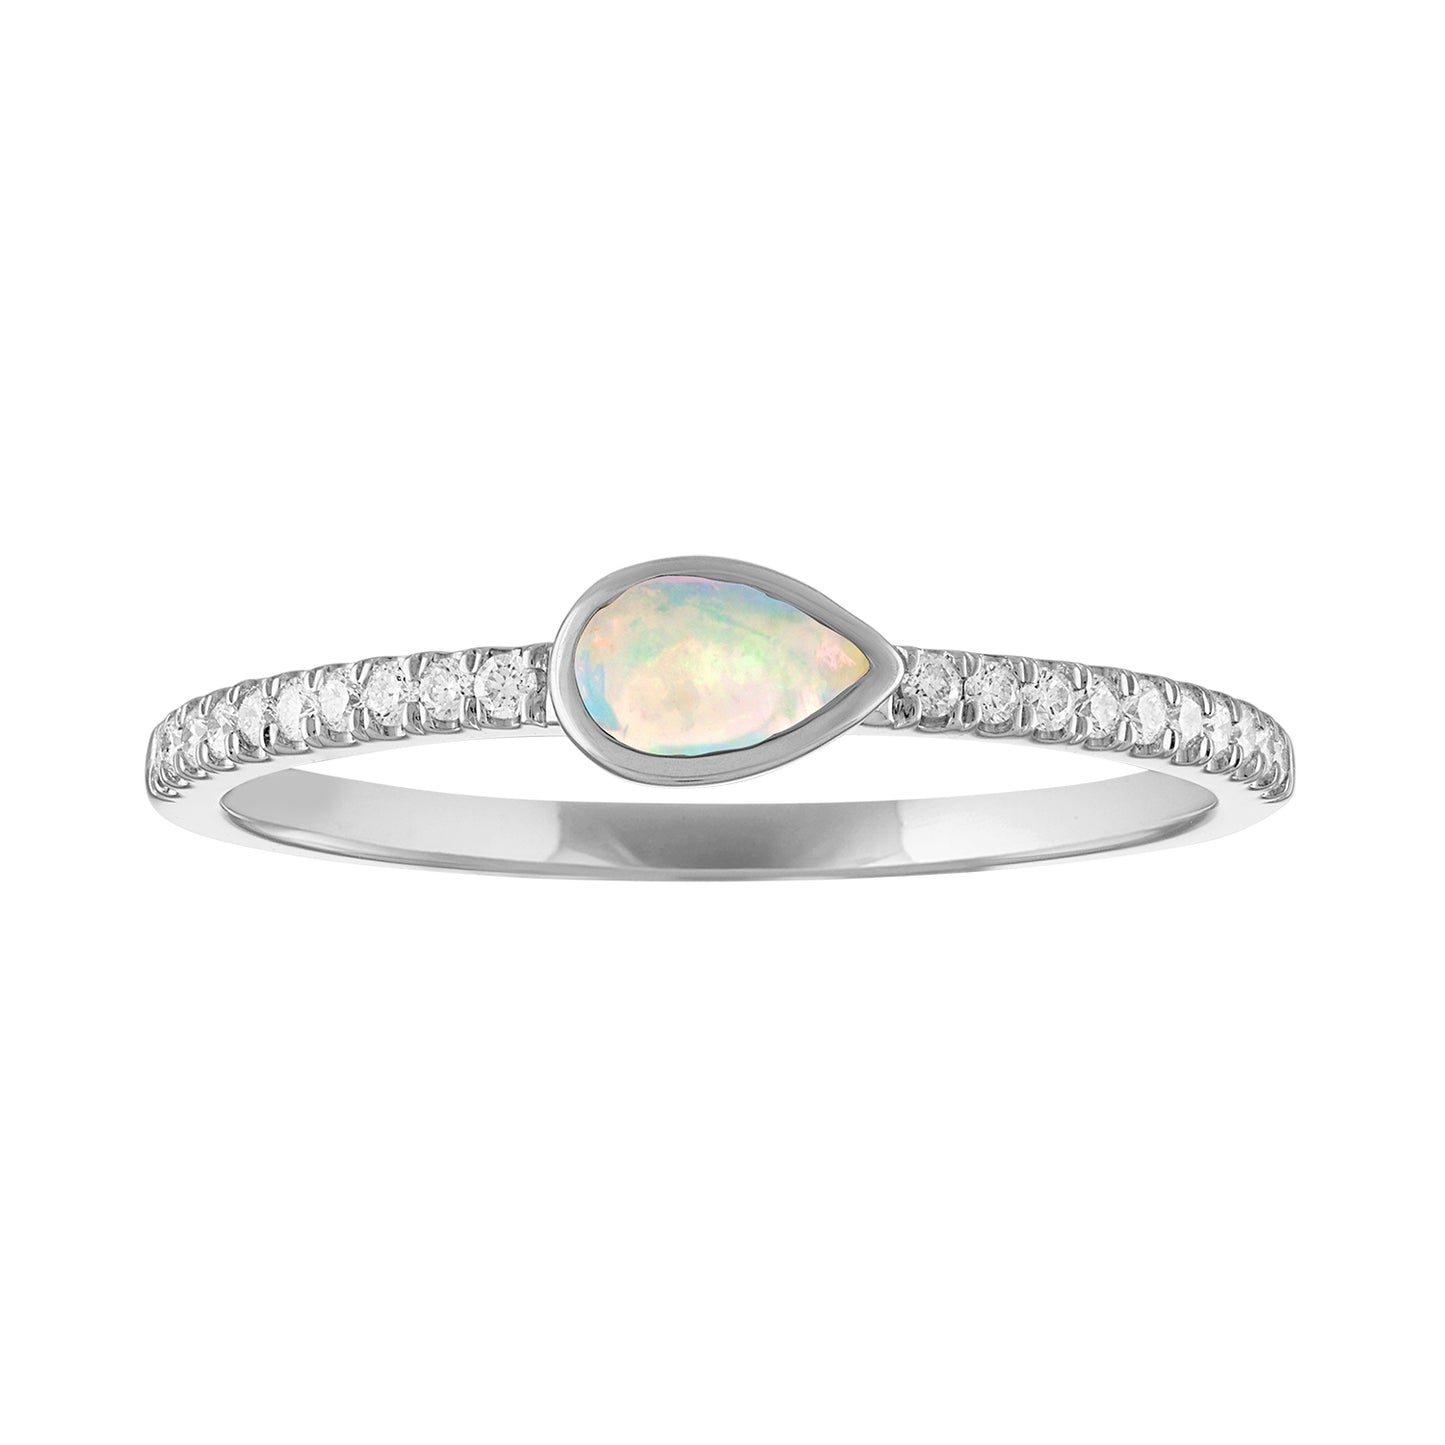 White gold skinny band with a bezeled pear shape opal in the center and round diamonds on the shank. 